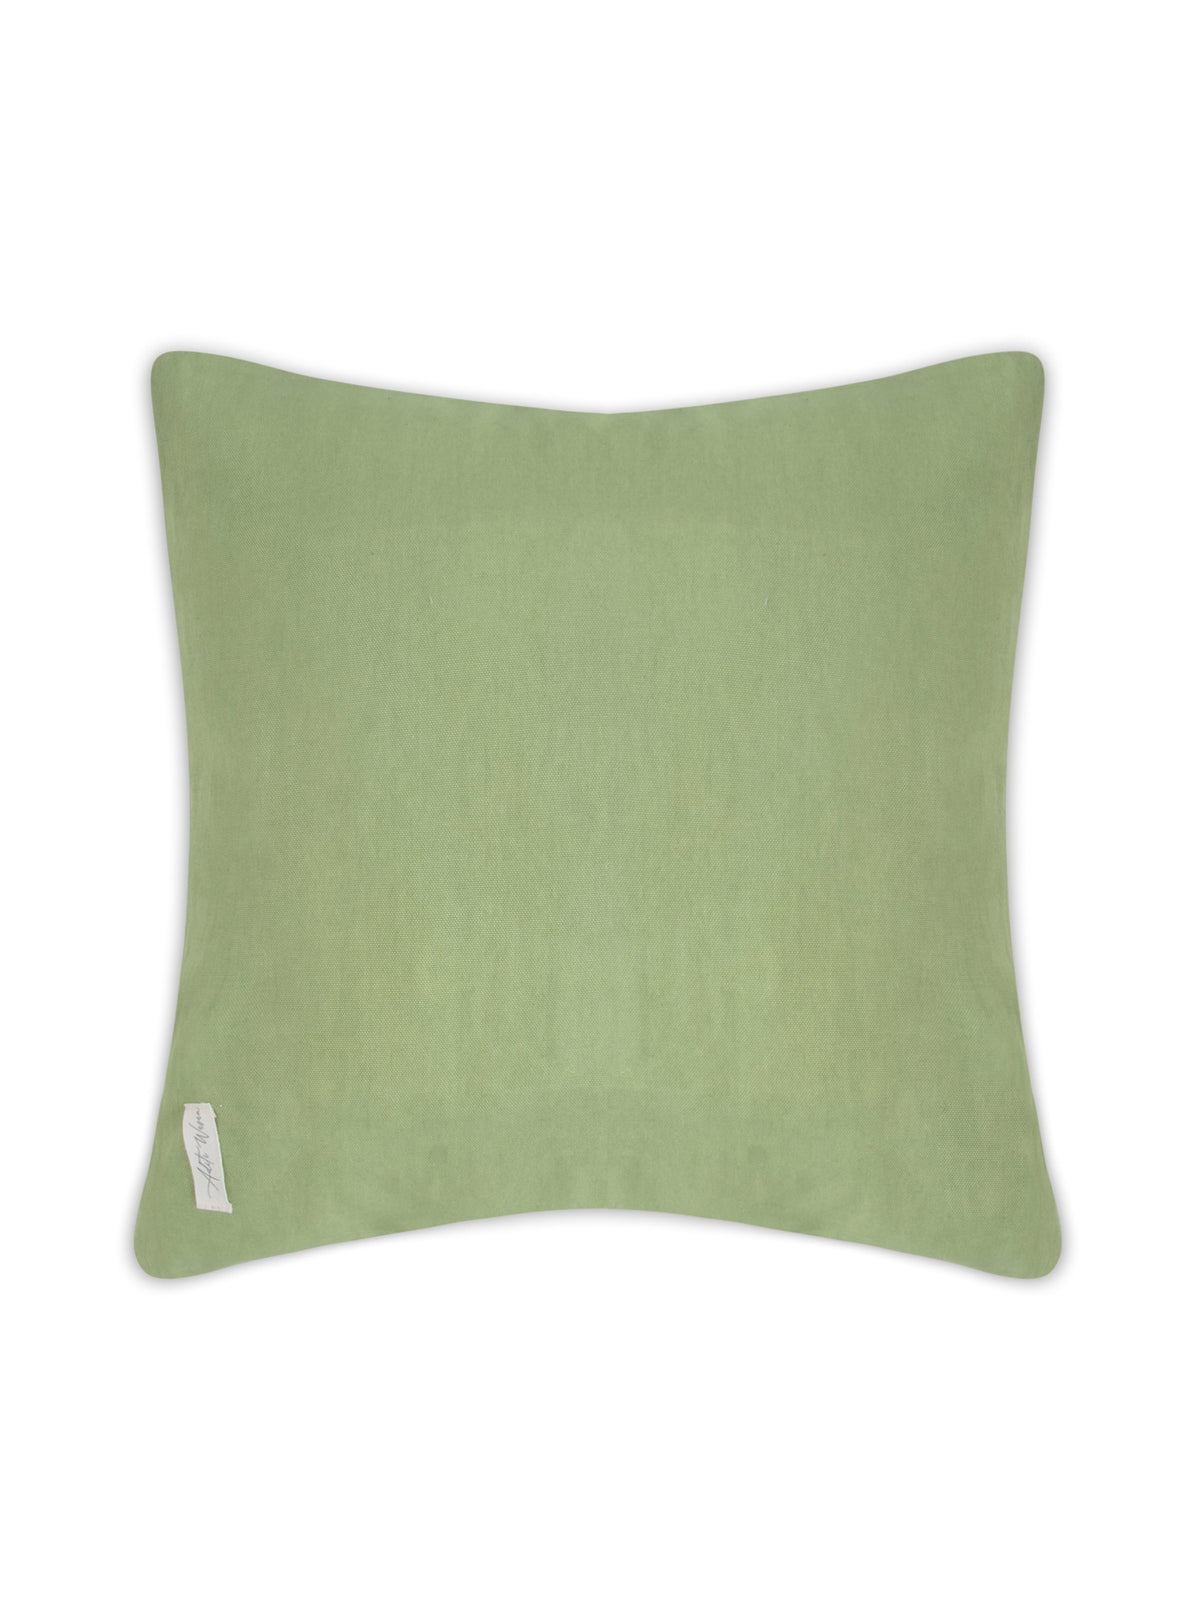 Green cotton tweed weave cushion cover